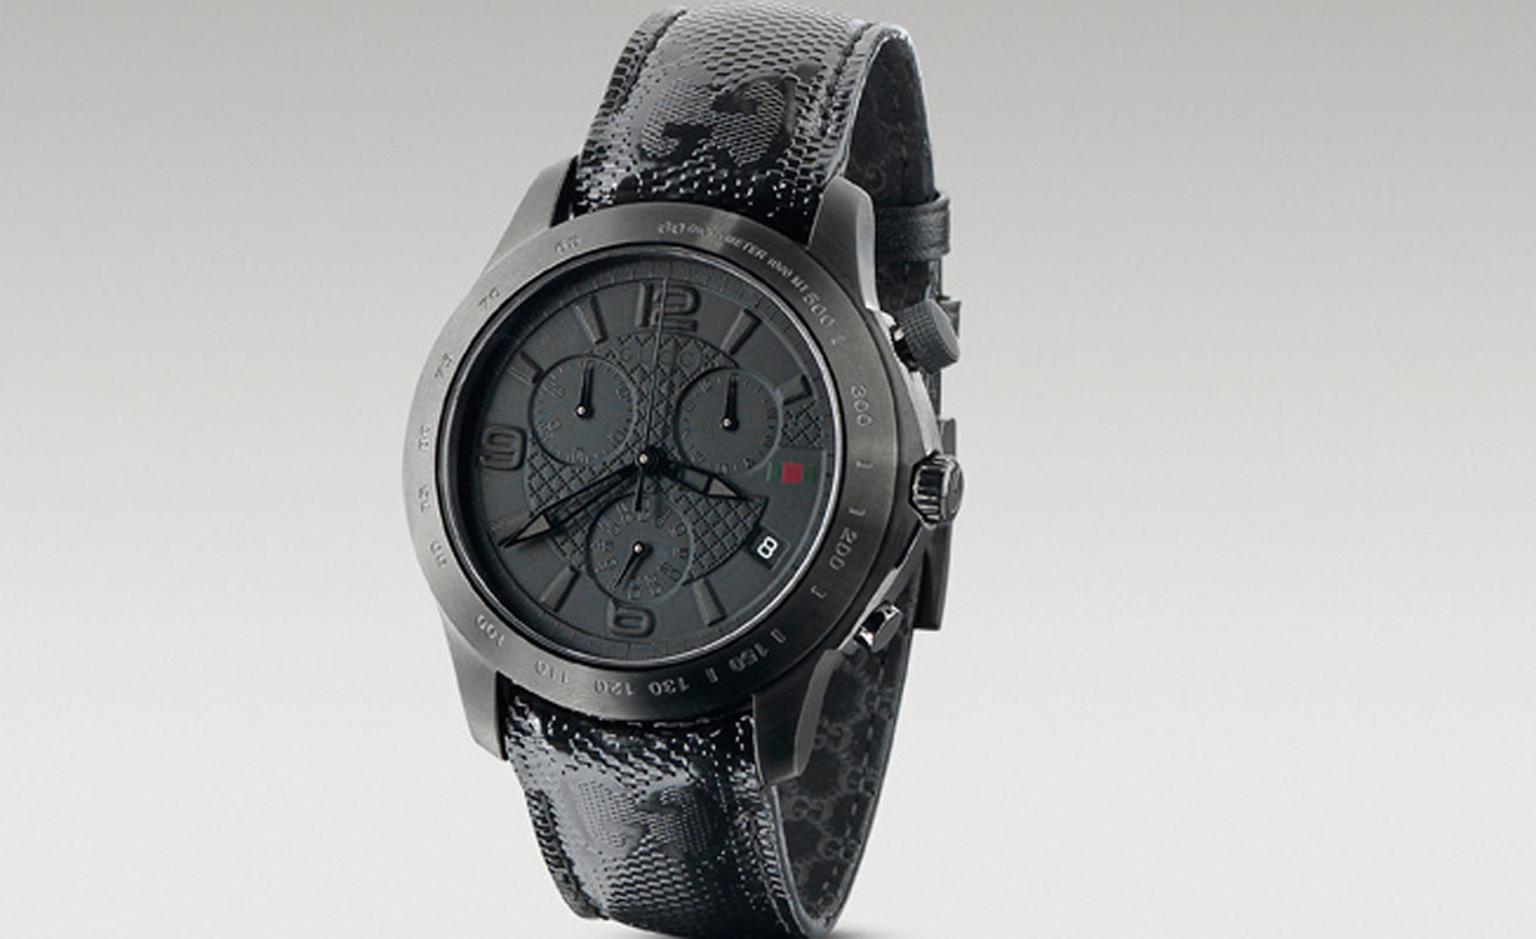 Gucci watch that is part of the 500 by Gucci project.